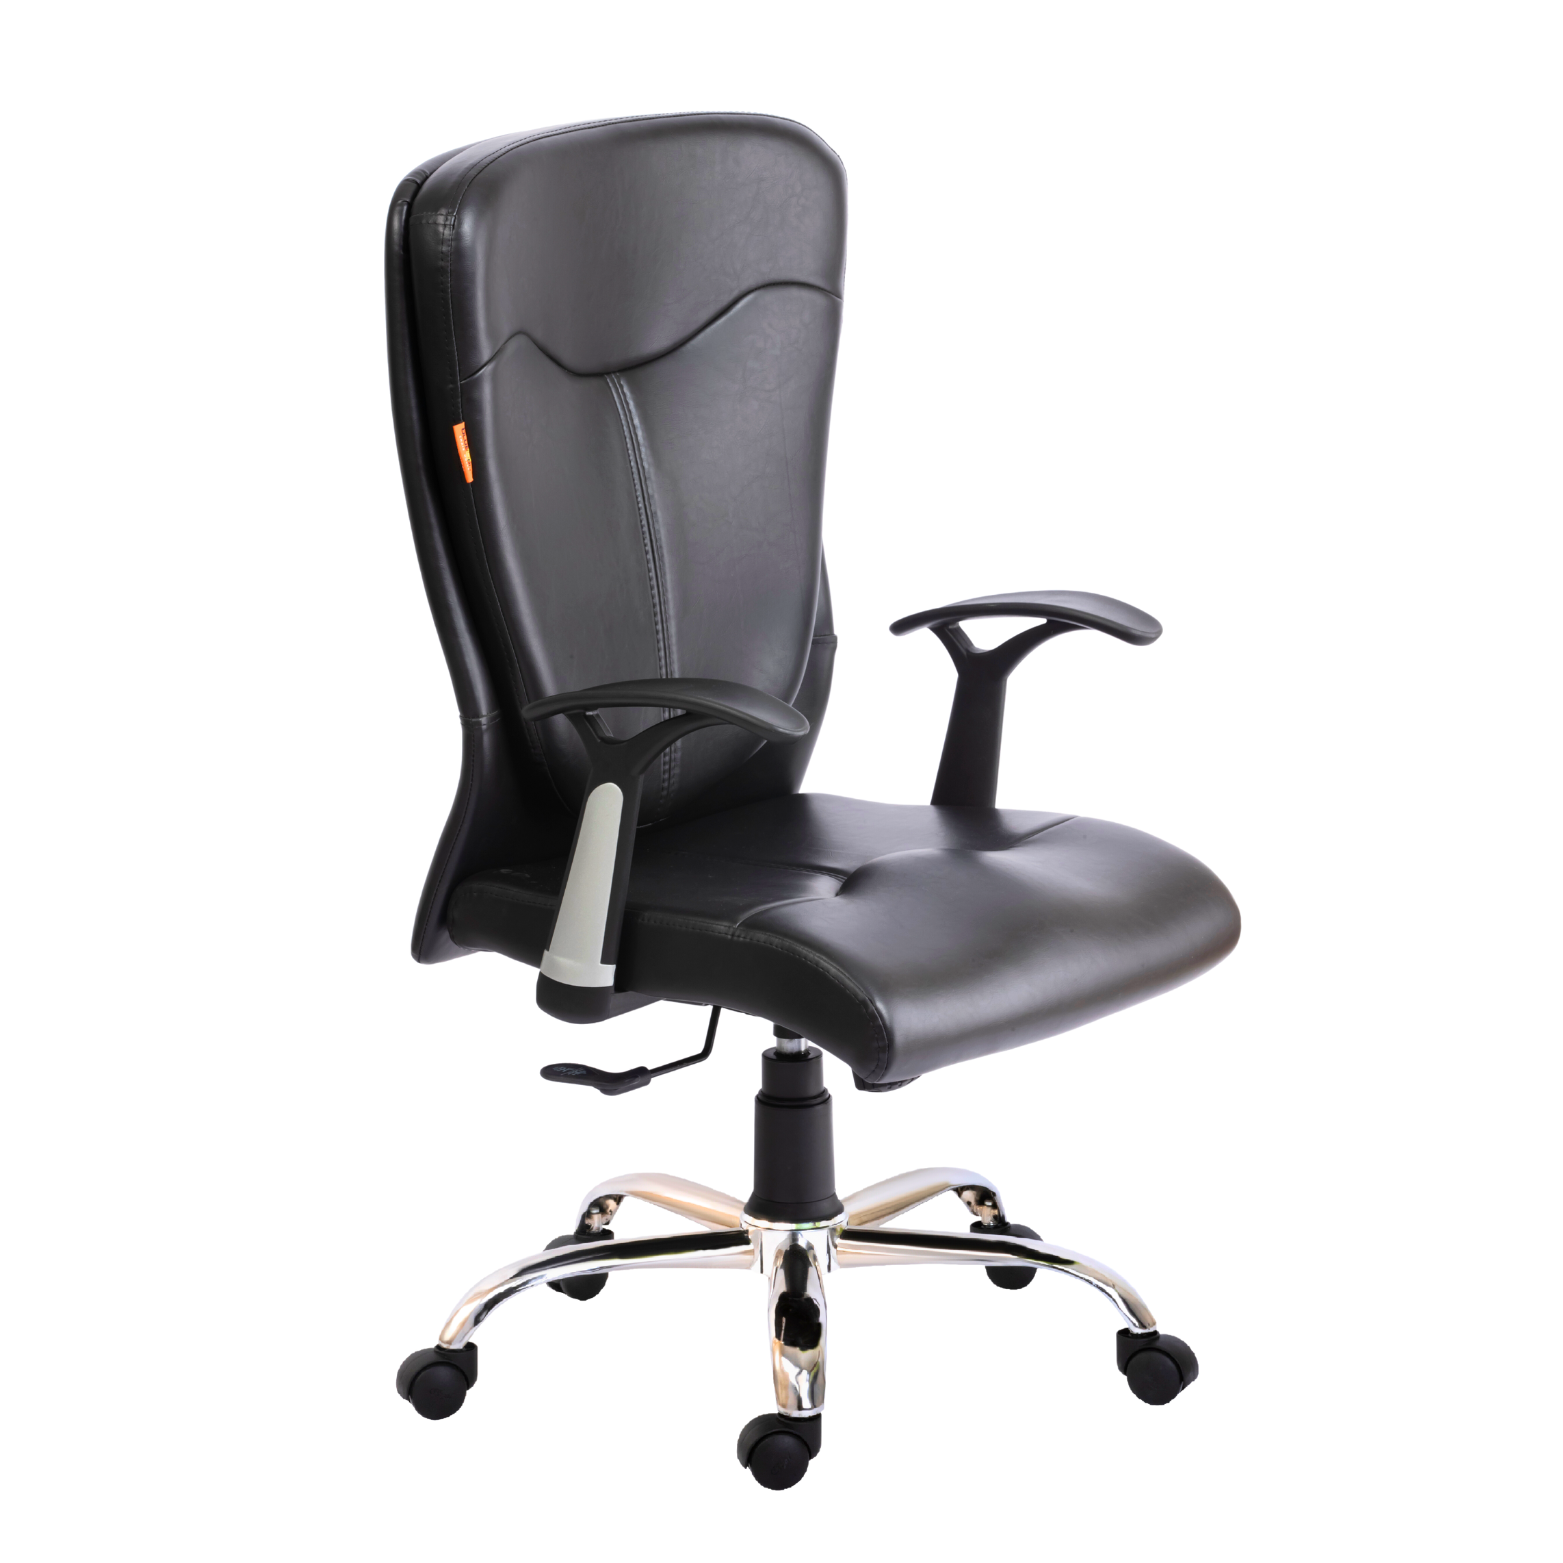 Proactive High Back Revolving Chair (Elegance) - Premium Workstation Chair with swivel function and tilting tension adjustment.